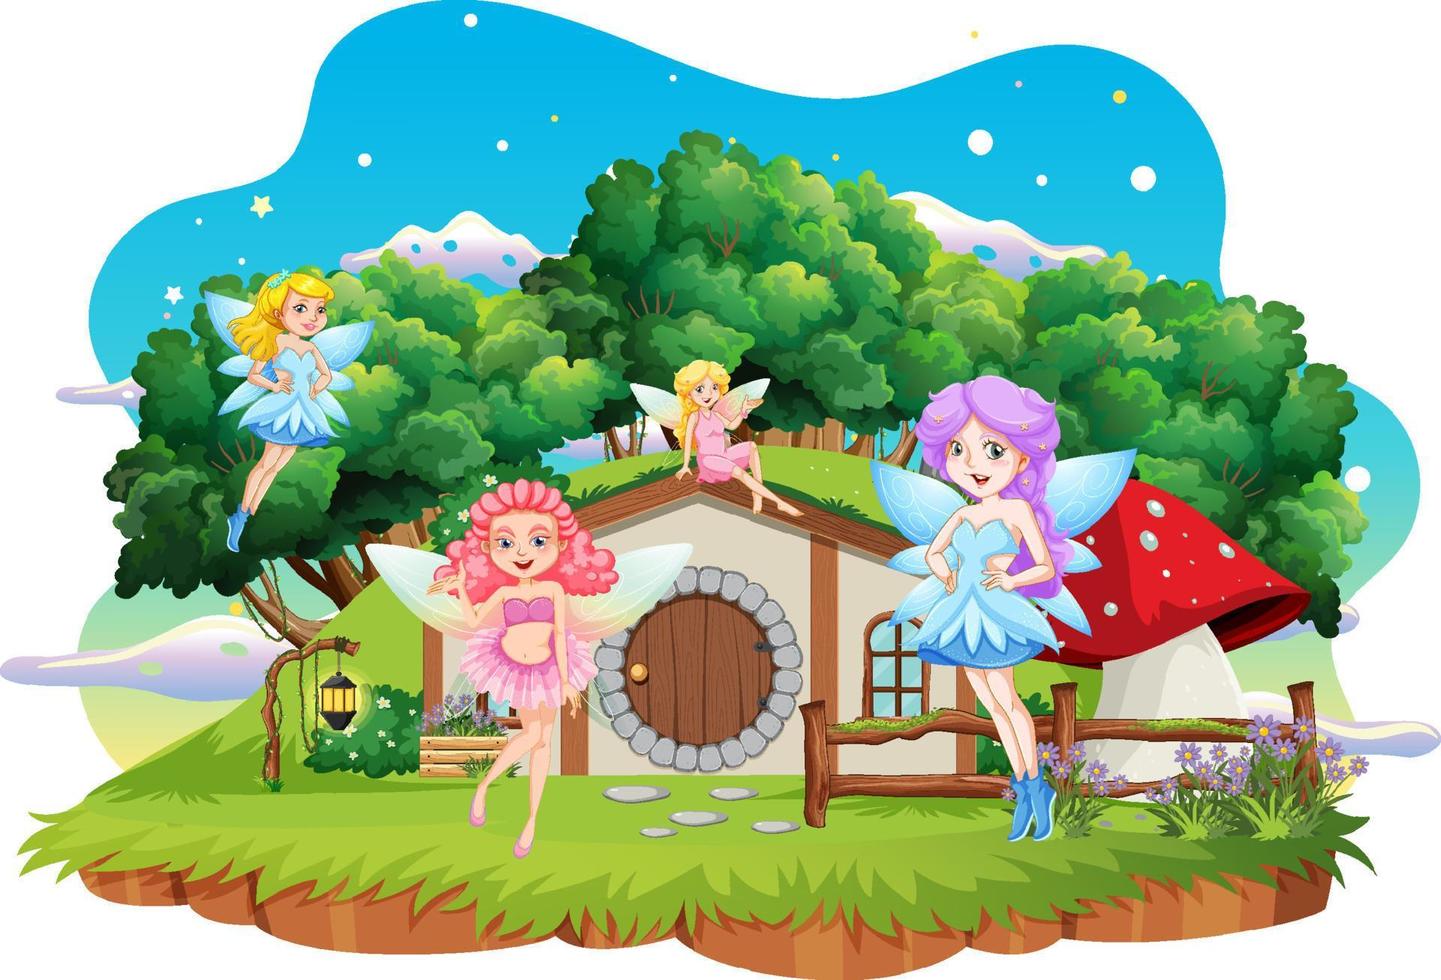 Fairies at hobbit house on white background vector